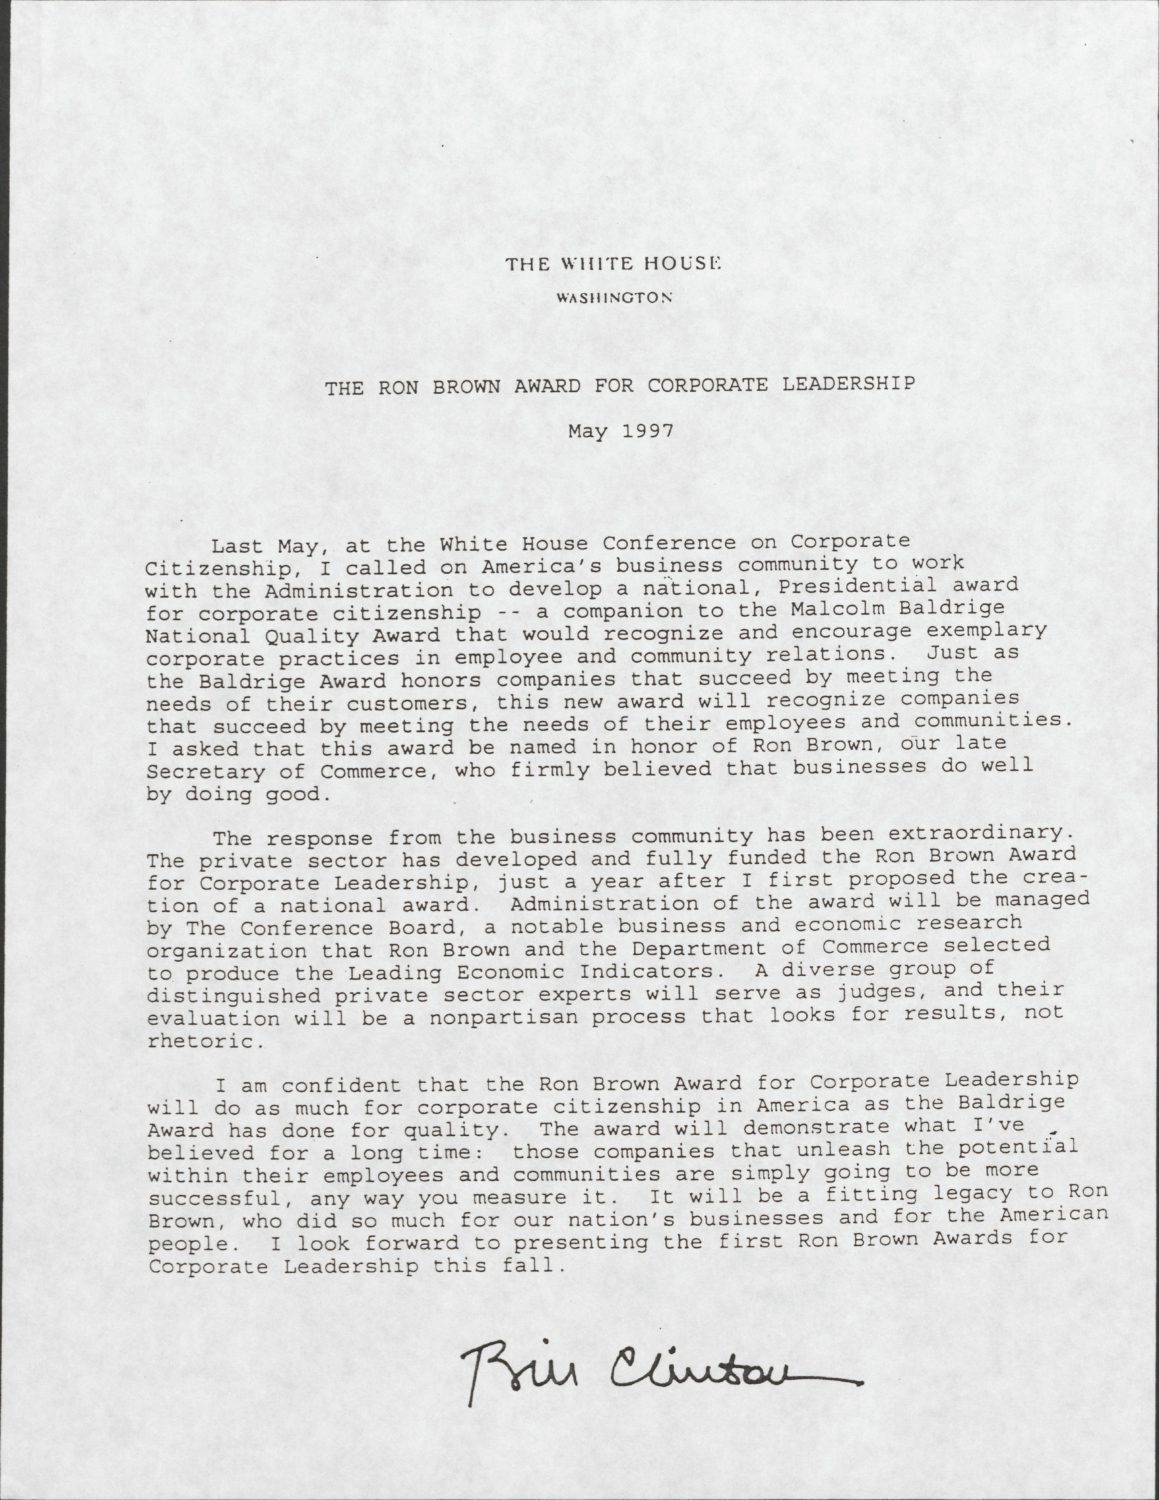 A 1997 letter from then-President Bill Clinton discussing the formation of the Ron Brown Award for Corporate Leadership.